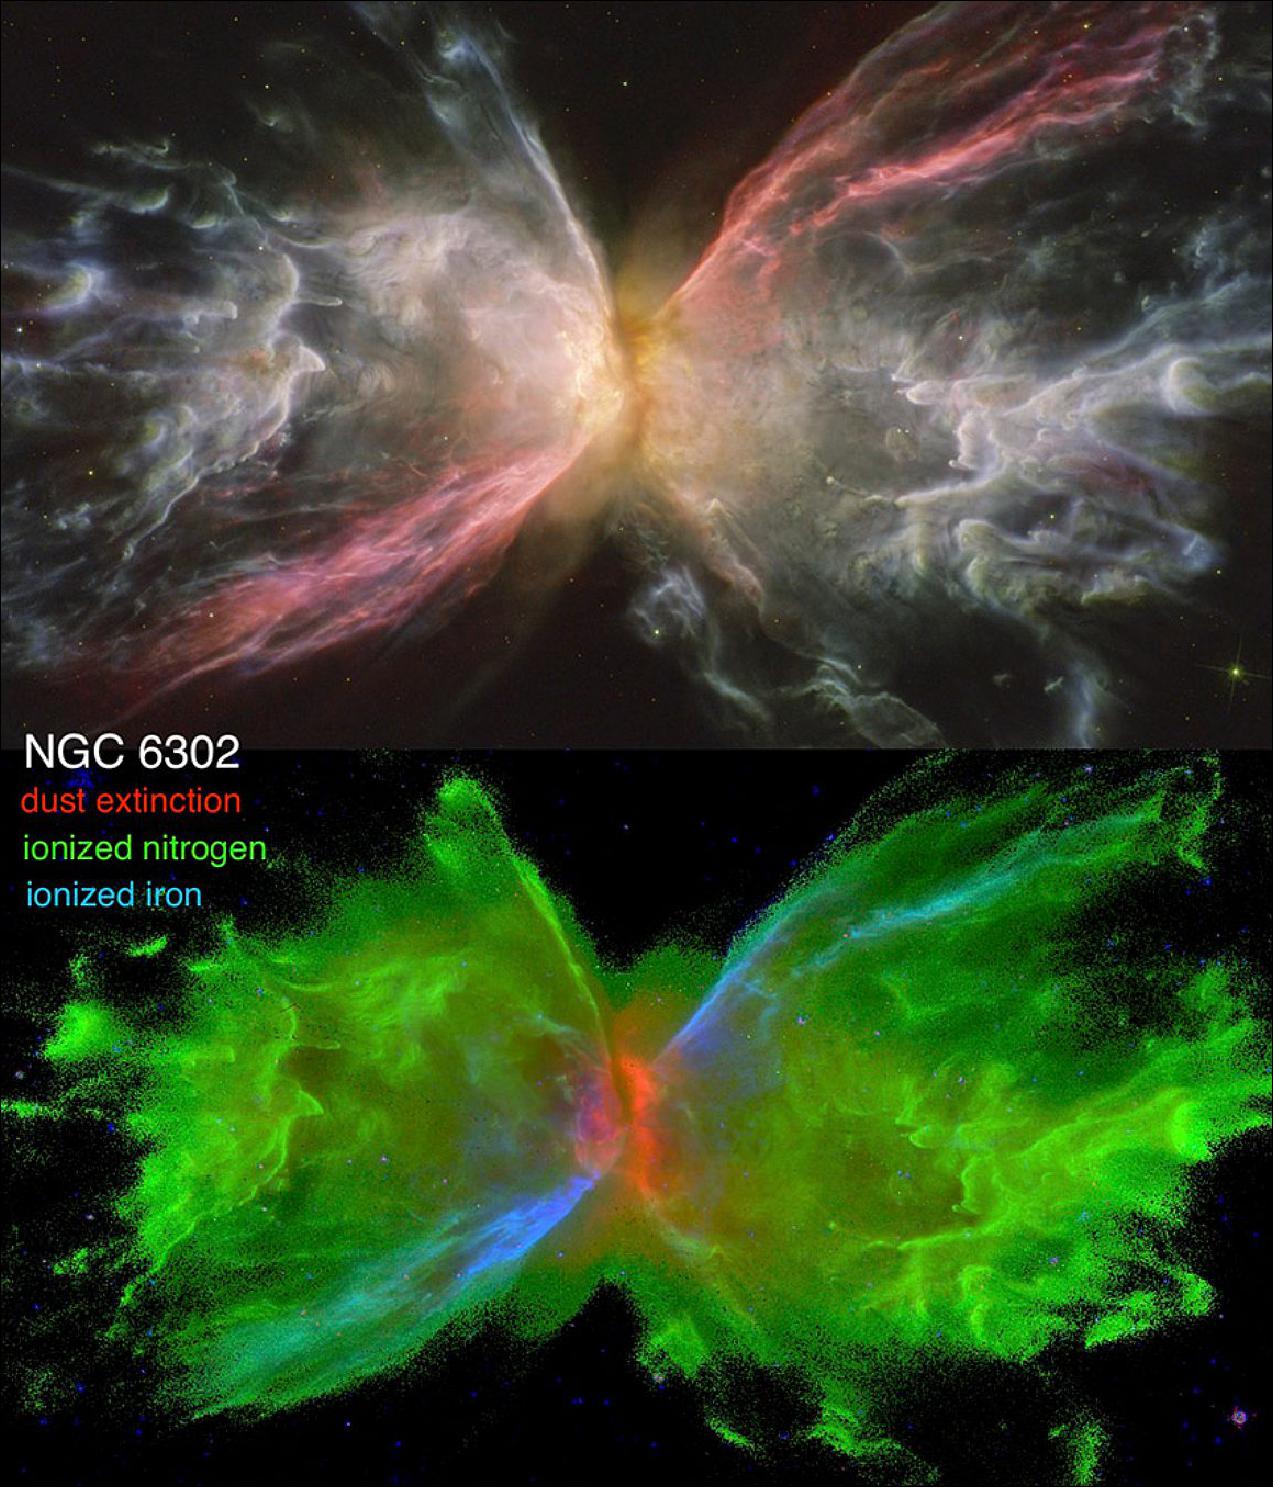 Figure 122: On top is an image of the Butterfly Nebula (NGC 6302) captured by the Hubble Space Telescope in 2019 and released in 2020. Further analysis by researchers produced the RGB image on the bottom, which shows extinction due to dust, as inferred from the relative strength of two hydrogen emission lines, as red; emission from nitrogen, relative to hydrogen, as green; and emission from iron as blue (image credit: STScI, APOD/J. Schmidt; J. Kastner (RIT) et al.)